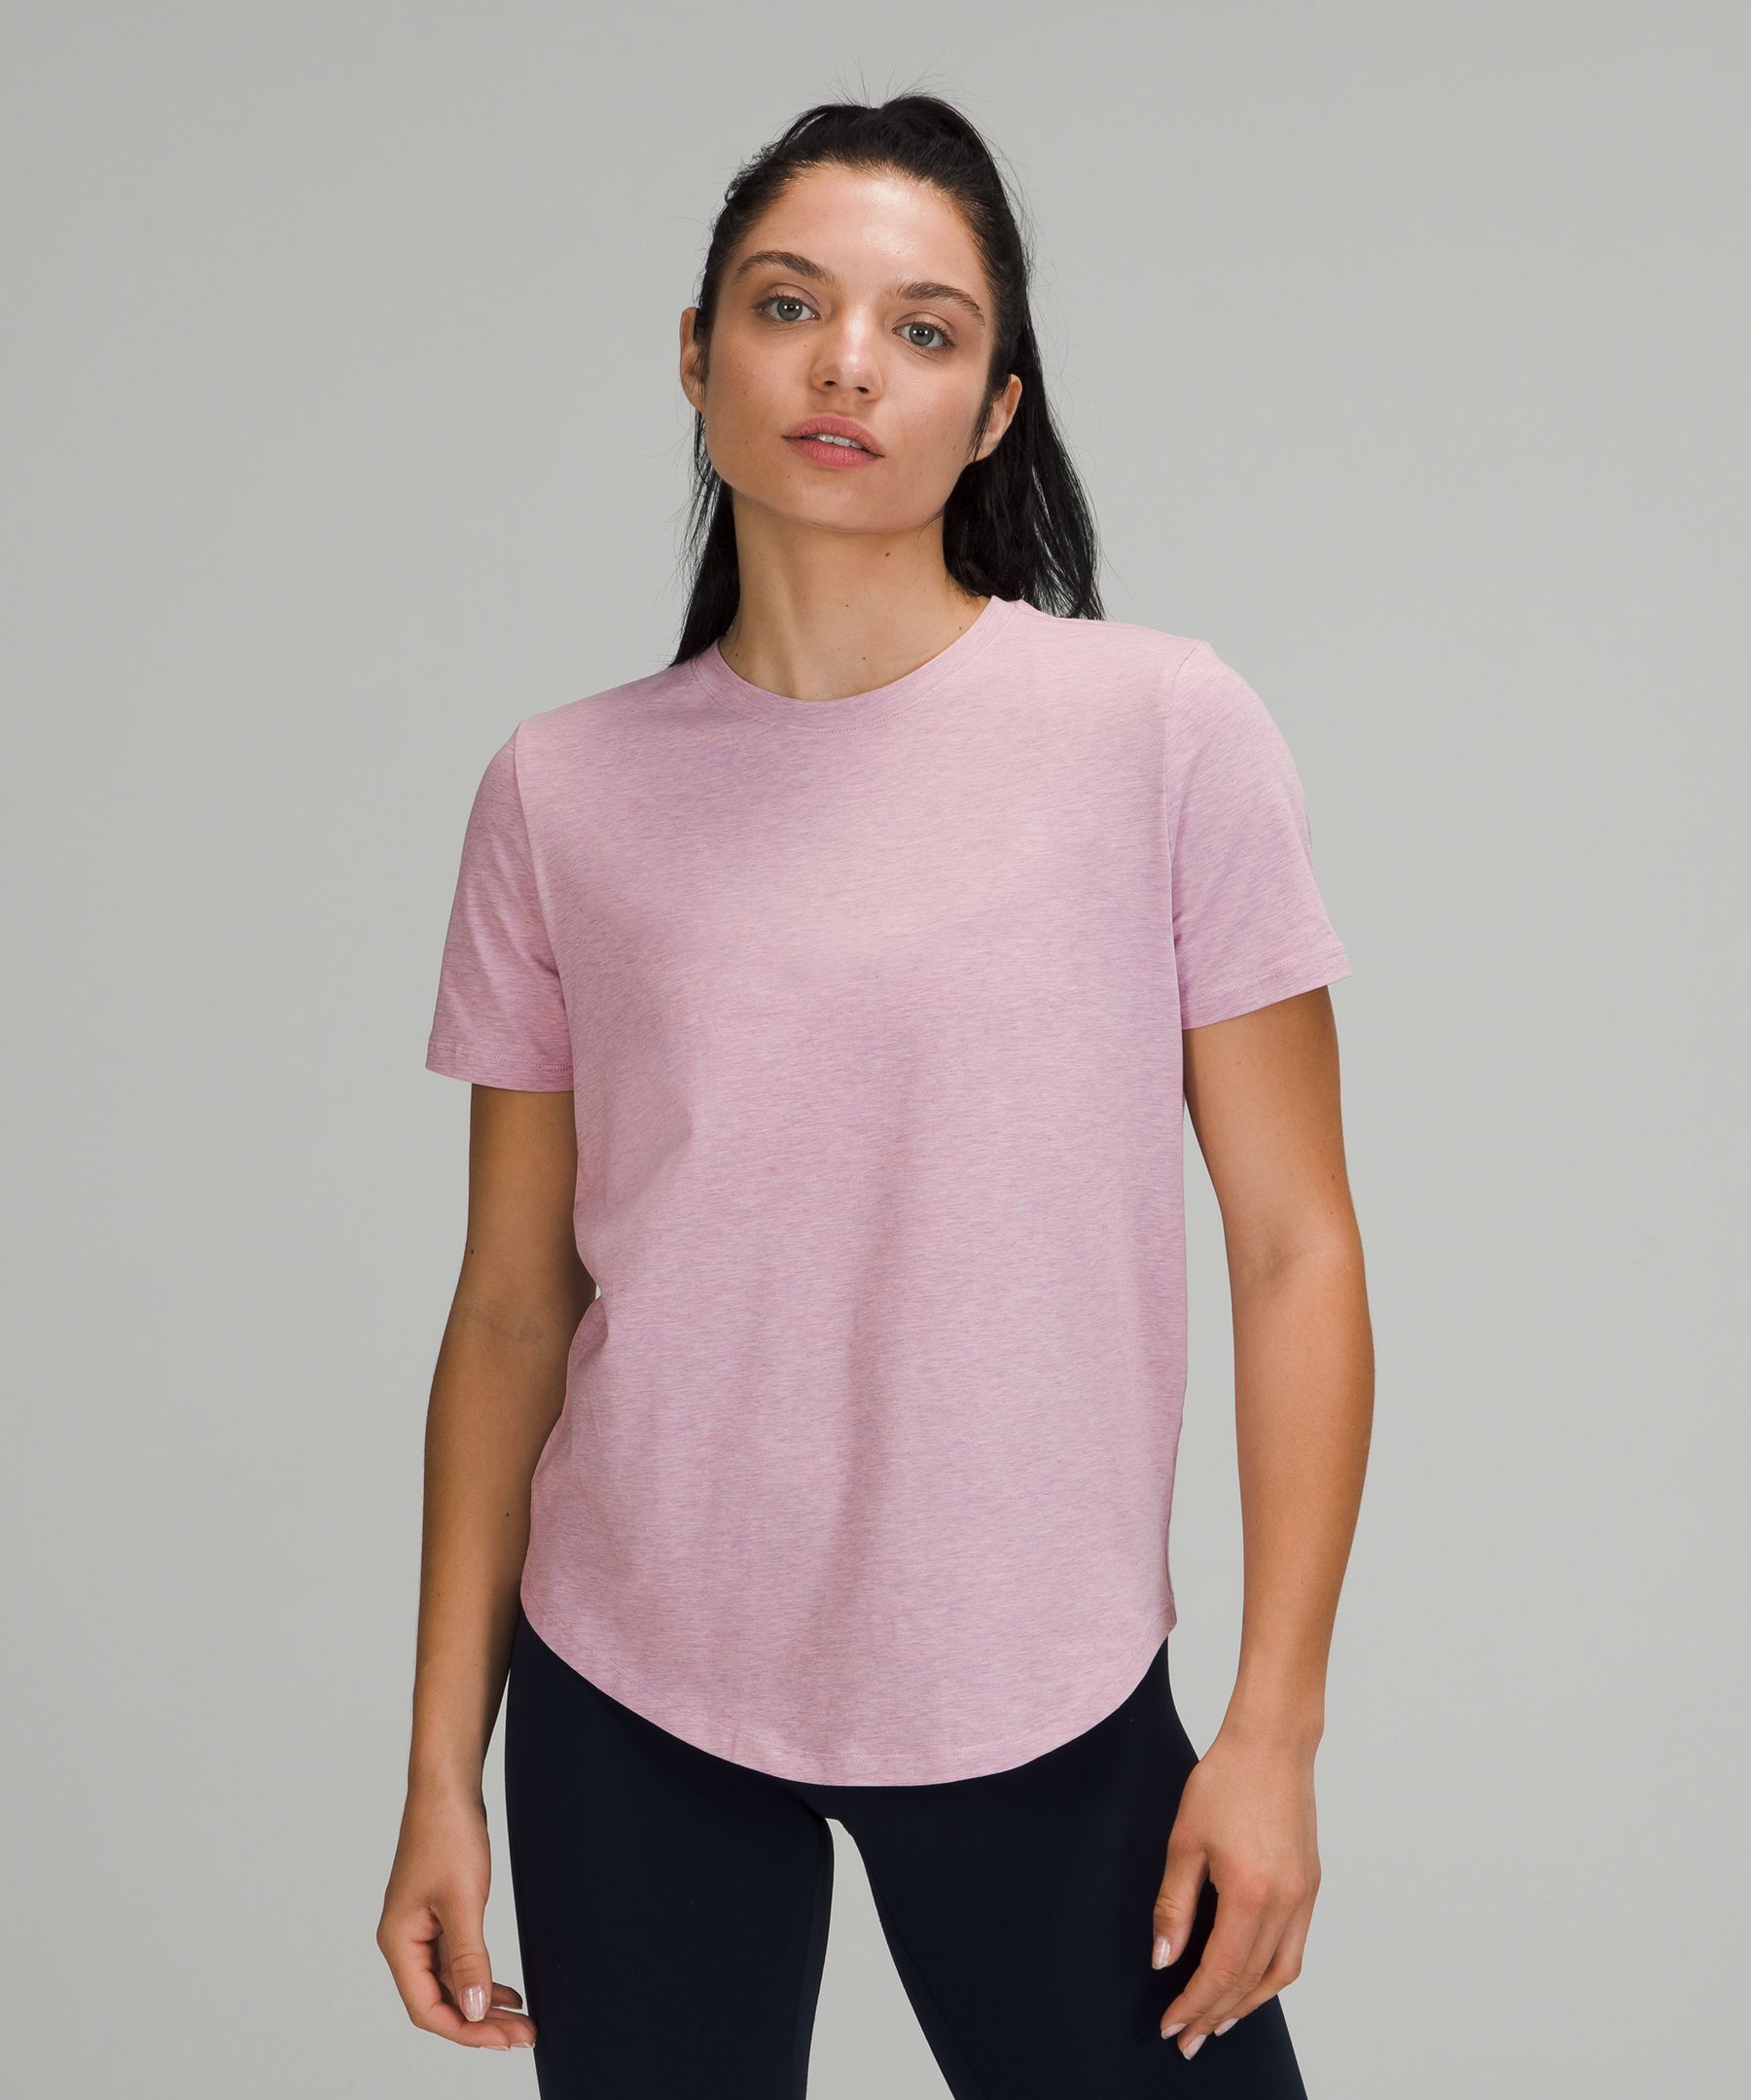 Lululemon Swiftly Tech Long Sleeve Crew In Pink Taupe/pink Taupe